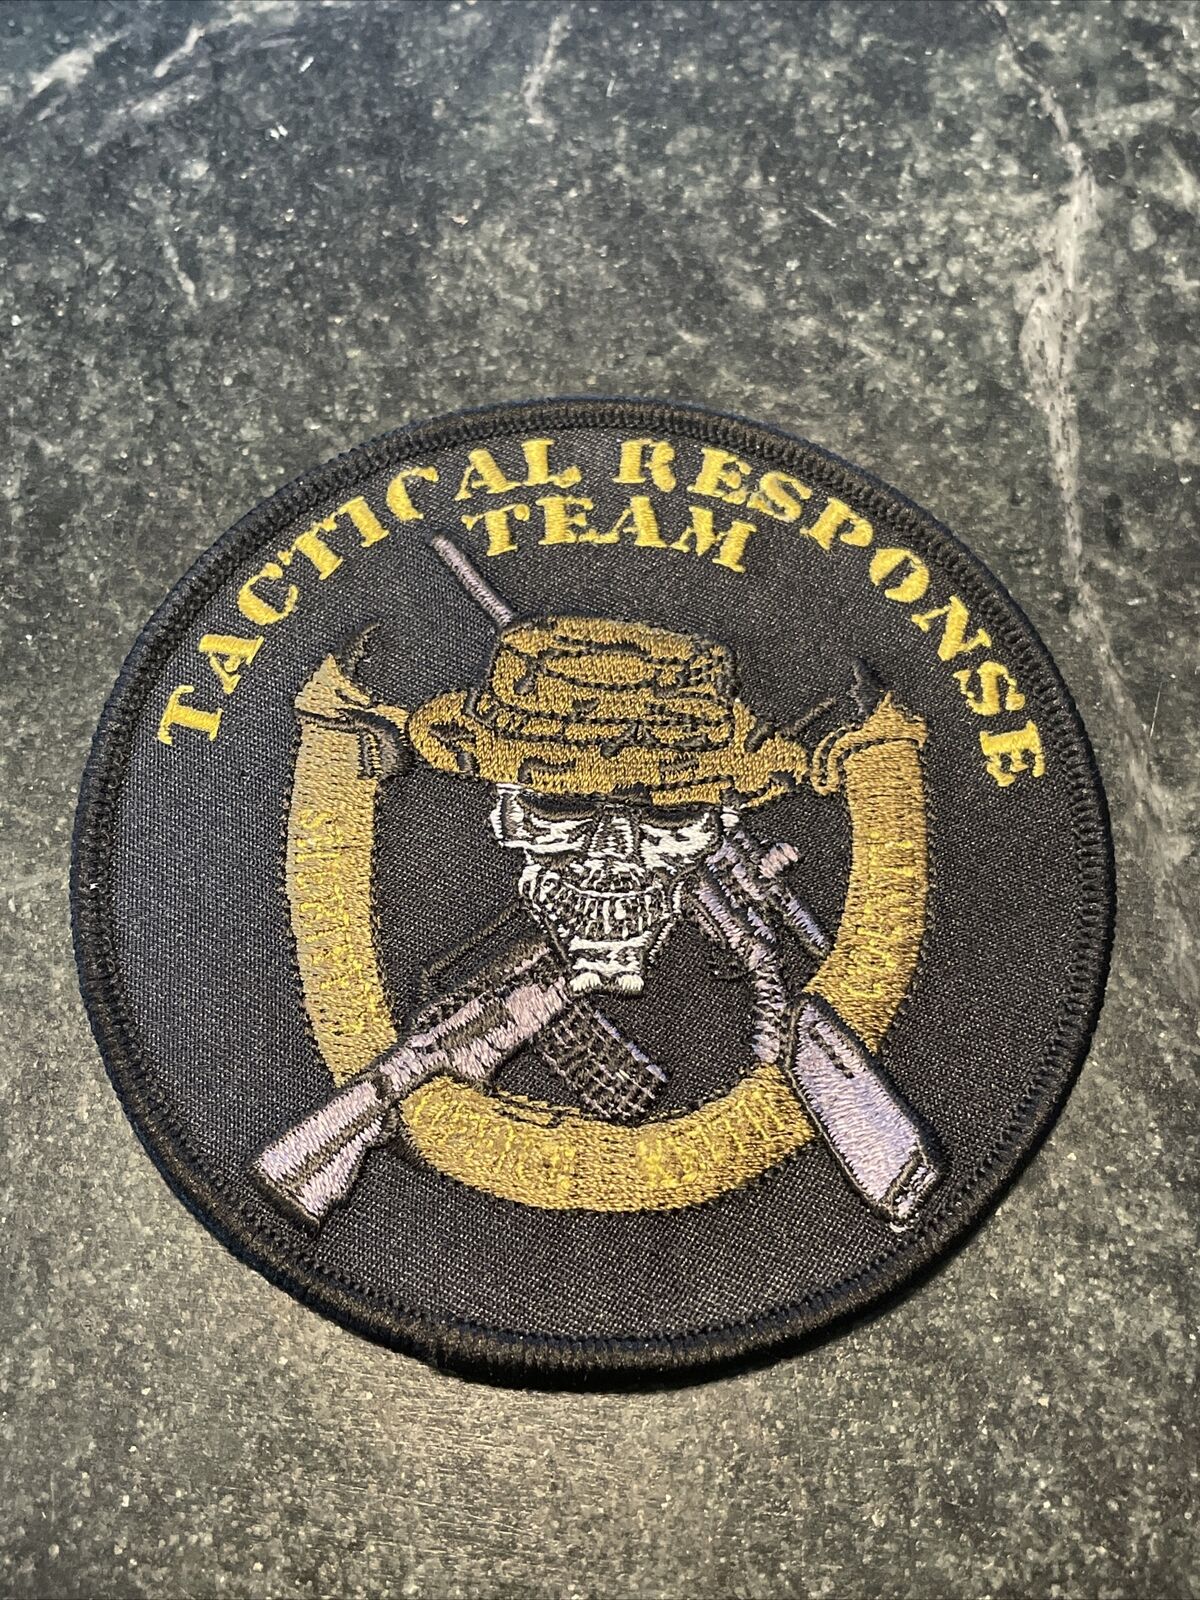 Keith County NE Tactical SRT Special Response Team SWAT Sheriff patch Iron On 4”